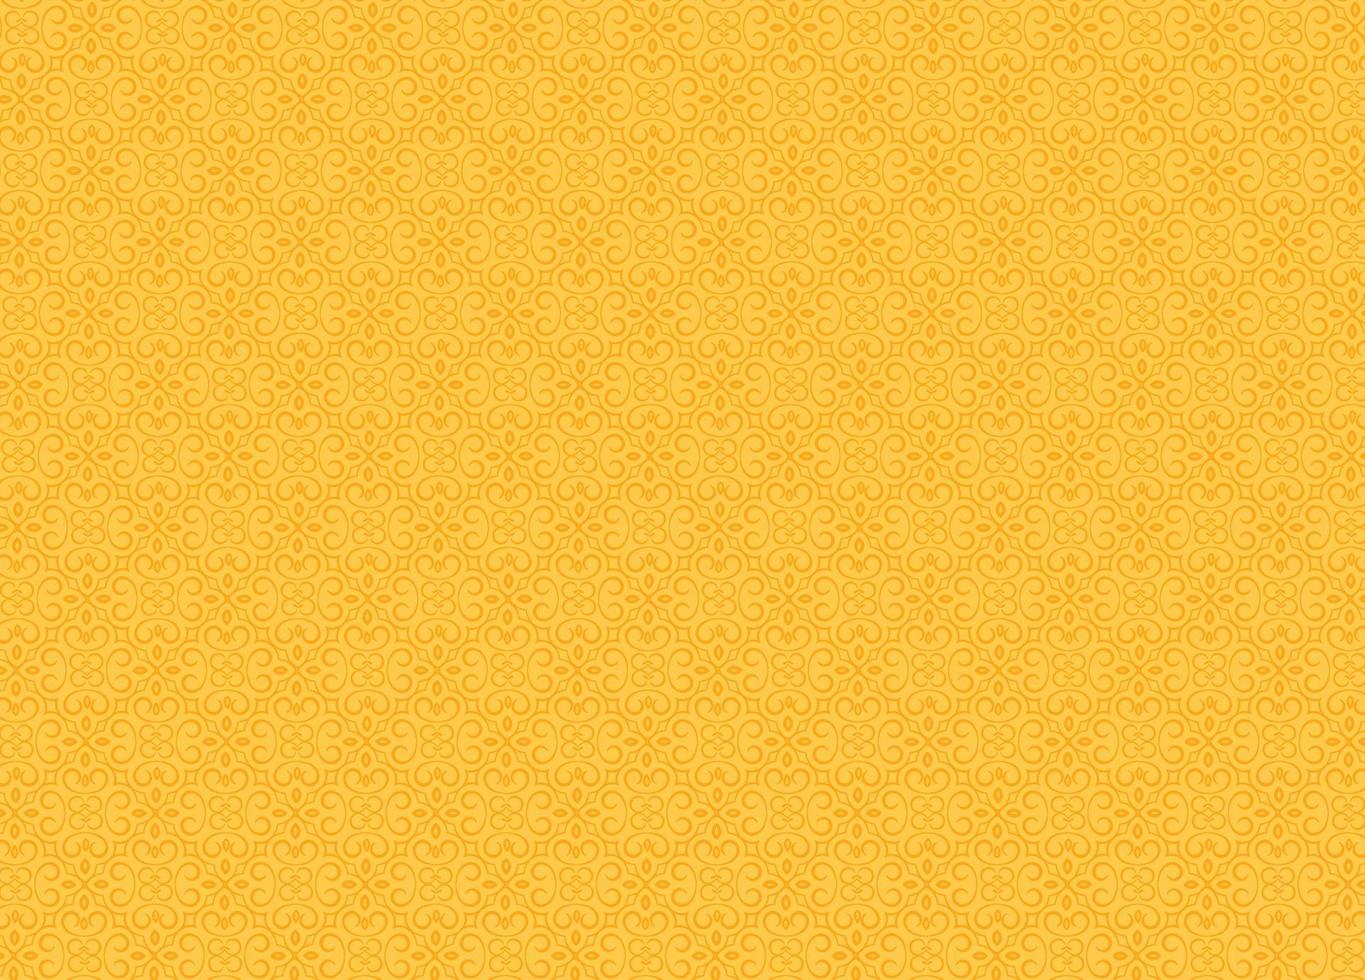 Yellow and Orange Pattern Seamless Decorate Background Image Vector